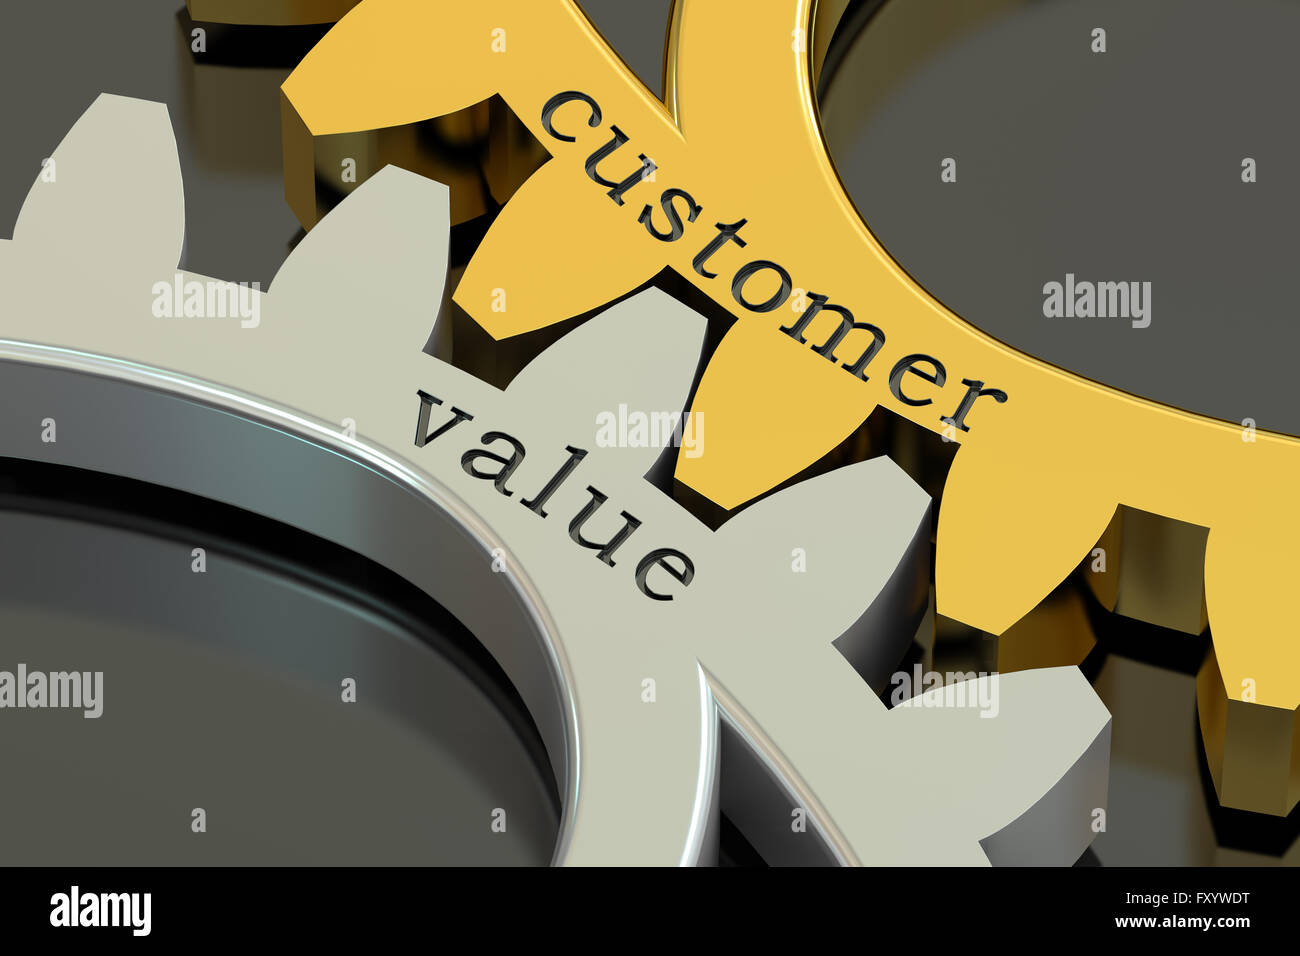 Customer Value concept on the gearwheels, 3D rendering Stock Photo